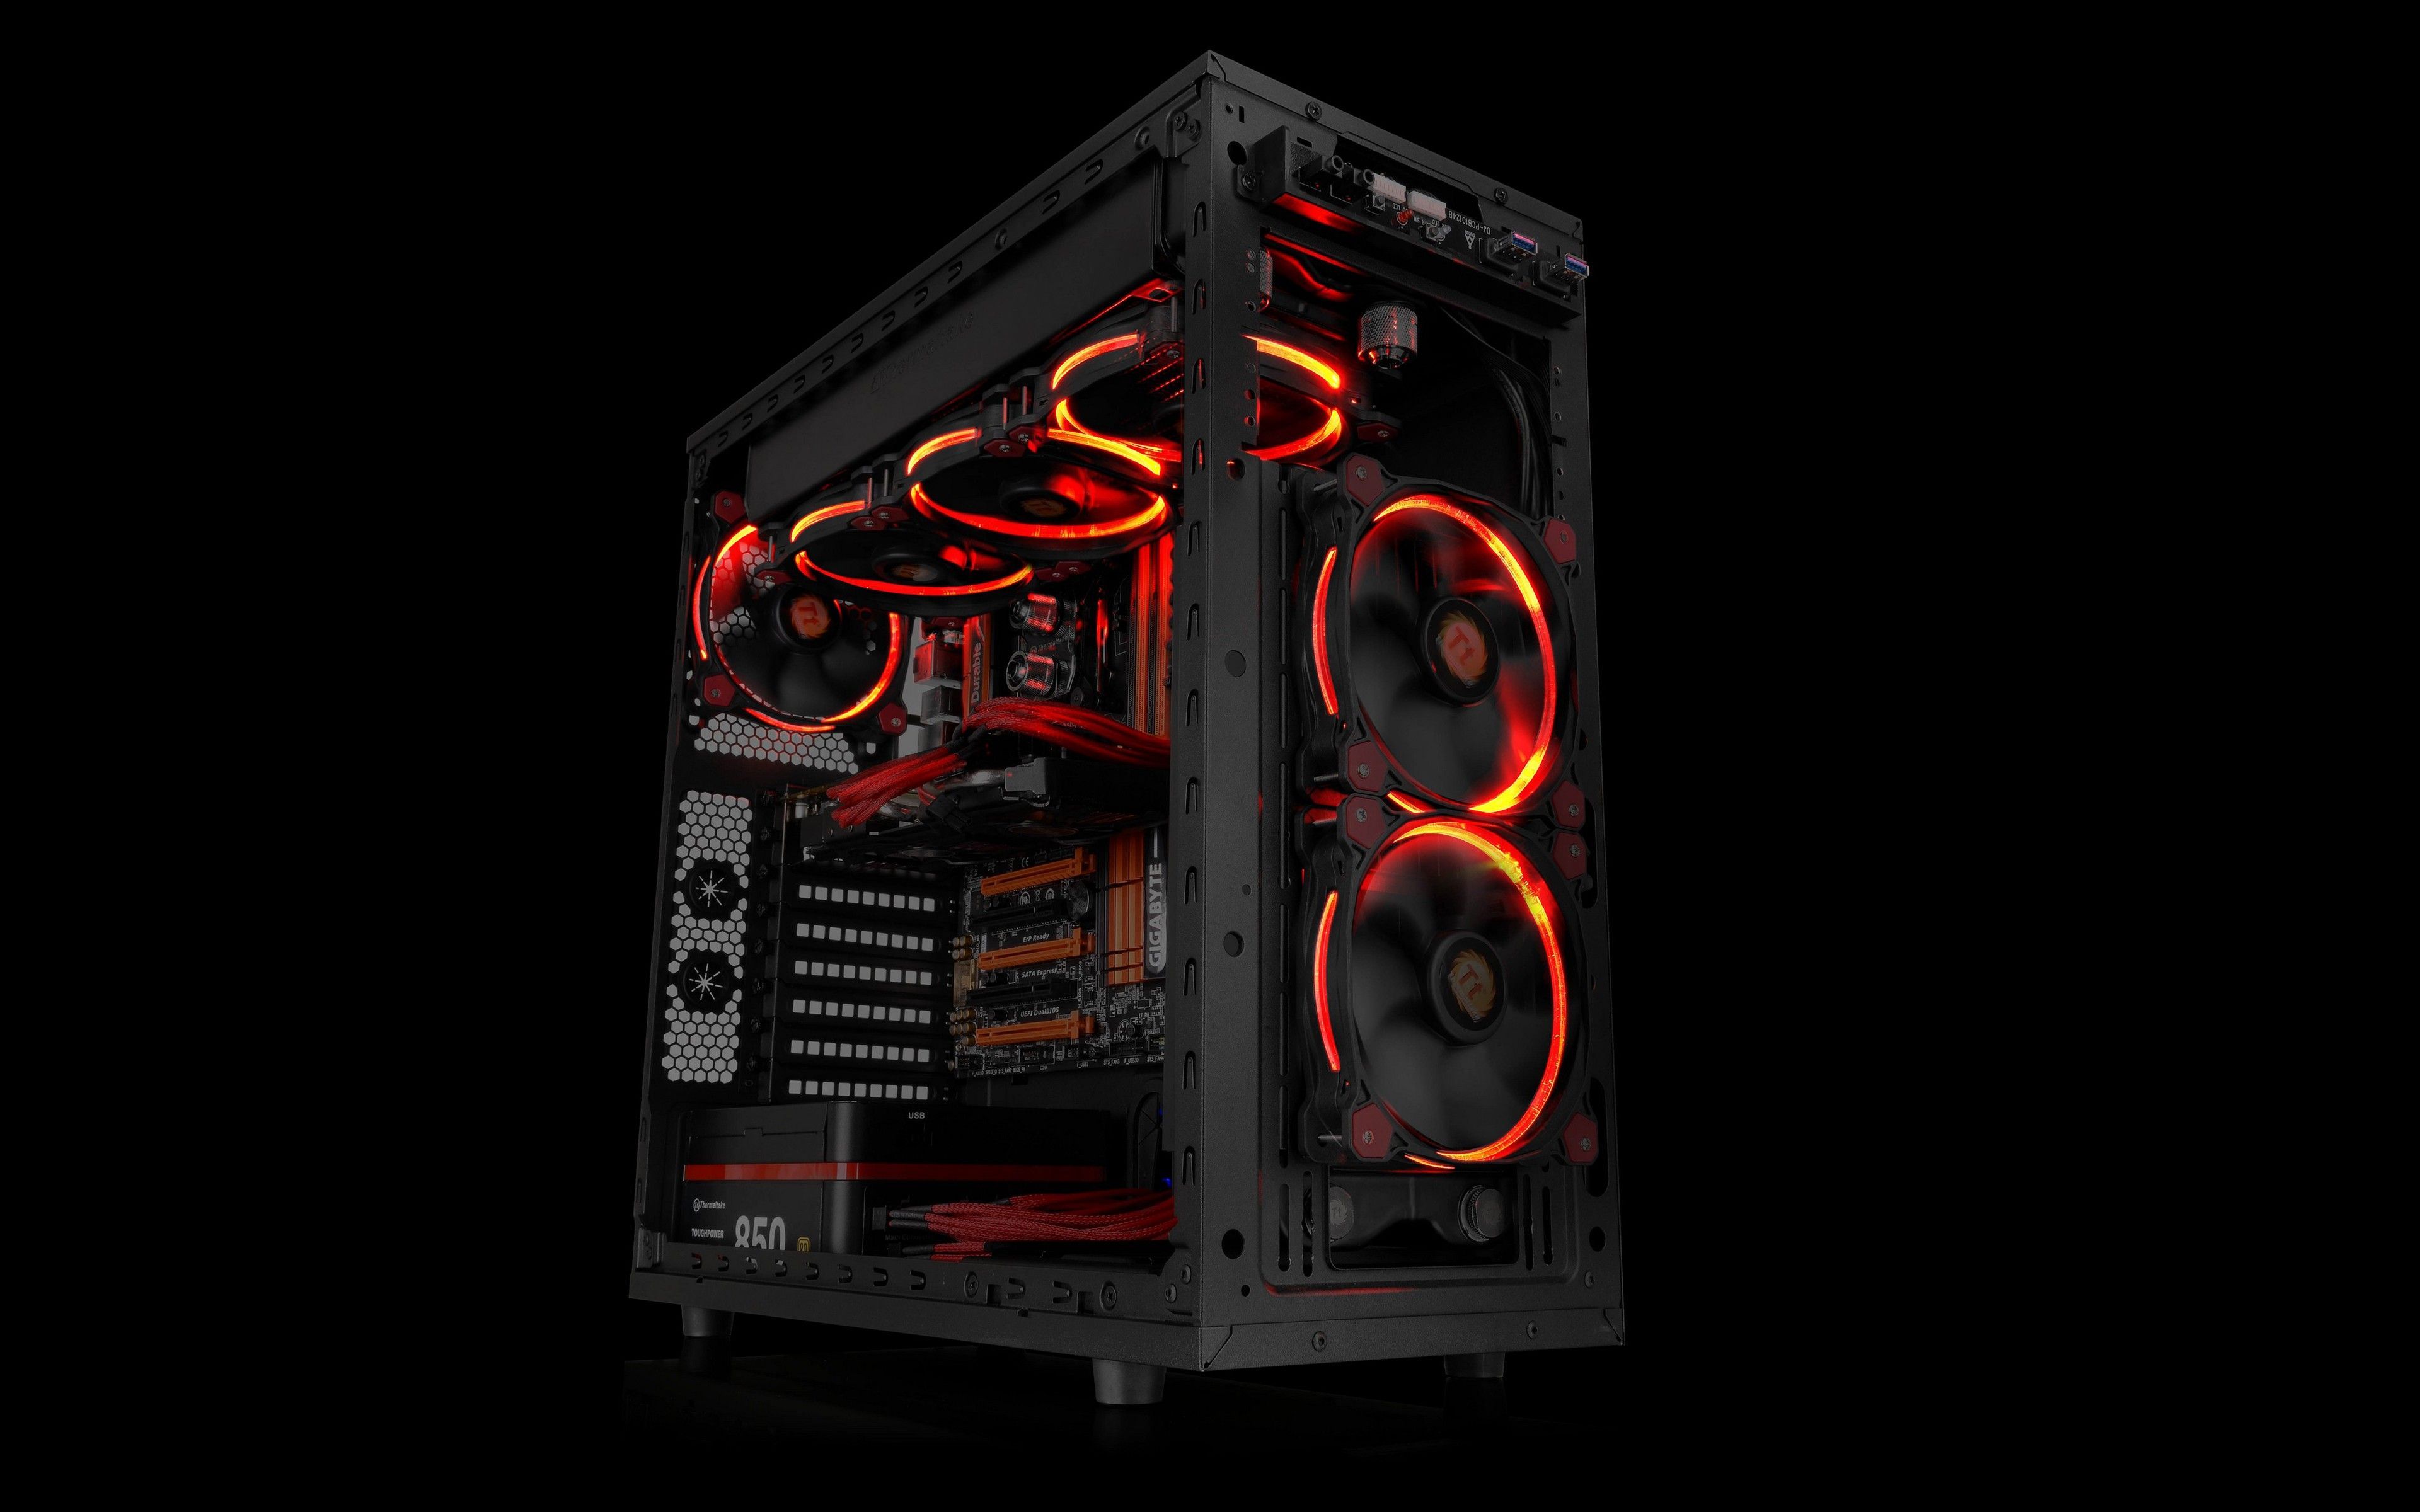 PC gaming, #computer, #PC cases, #technology, #Gigabyte, #hardware, #Thermaltake, #cooling fan, #simple background. Wallpap. Pc cases, Computer tower, Gaming pc